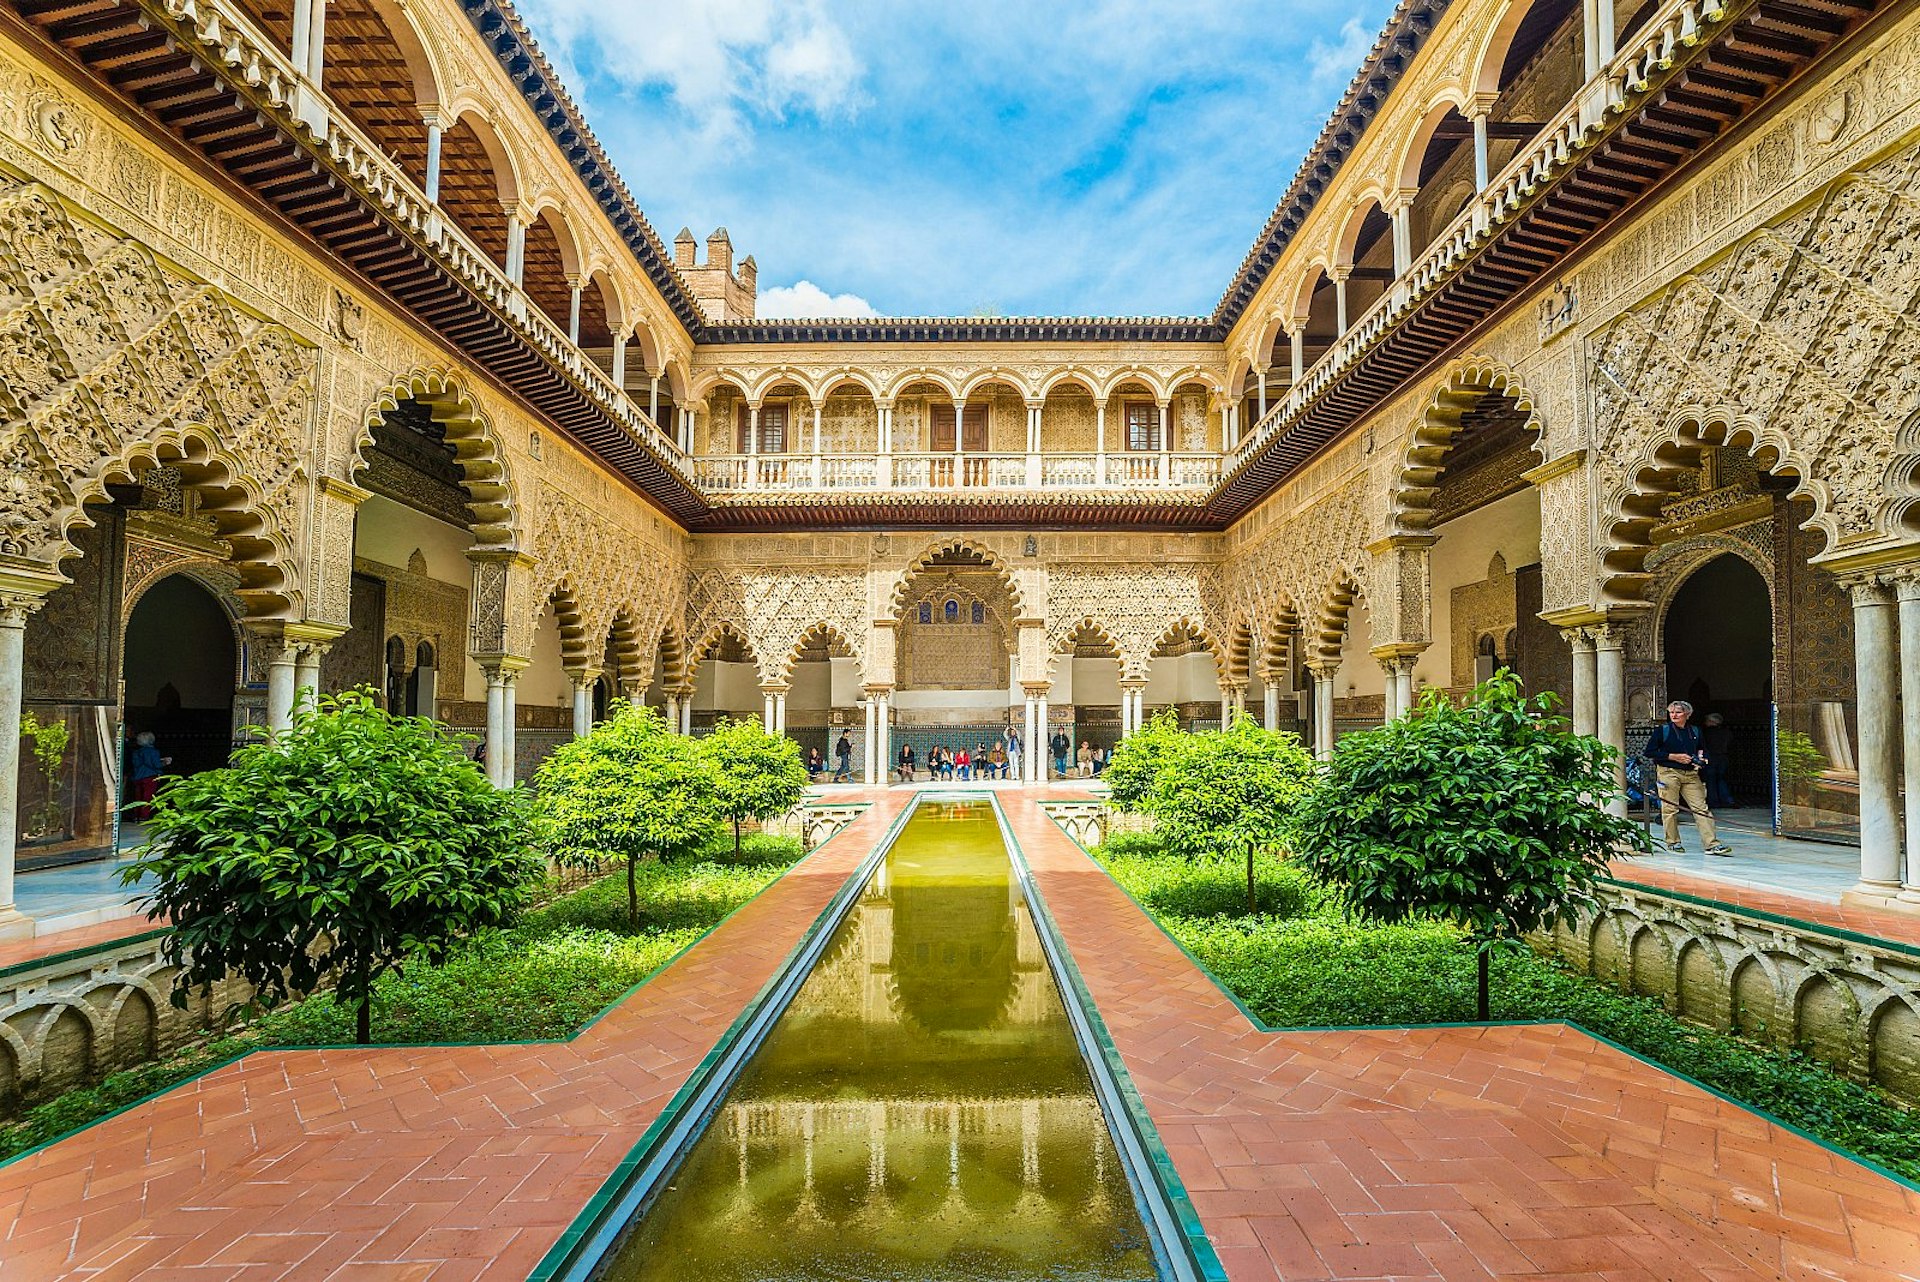 A courtyard inside Seville's Real Alcázar, surrounded by ornate gilded arches, plaster work and tiling with a sunken garden and long thin pool in the centre.